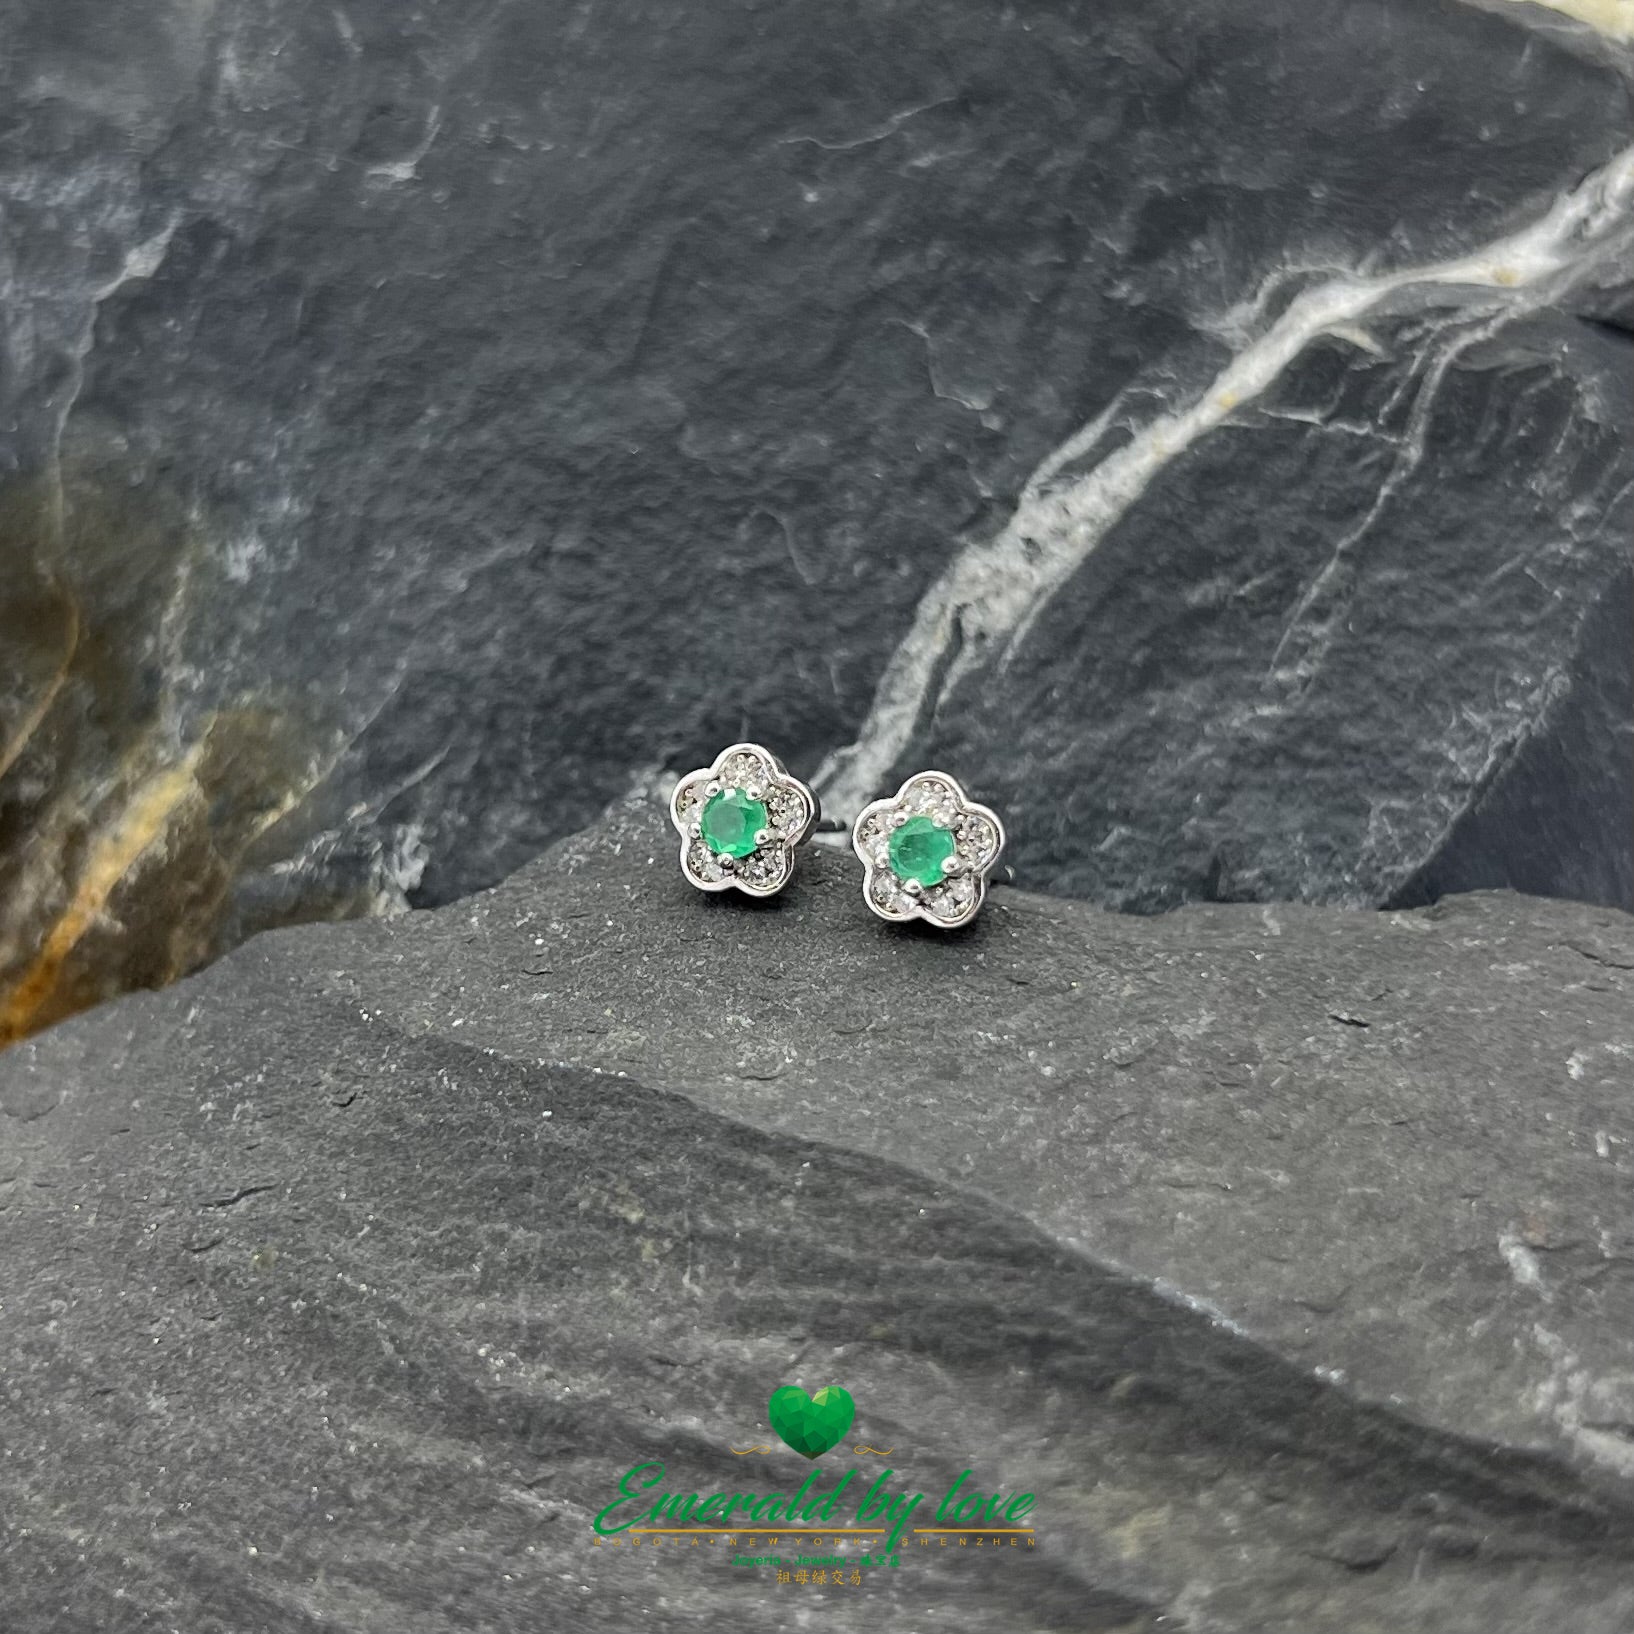 Tiny Floral Sterling Silver Earrings with Round Crystal Central Emerald